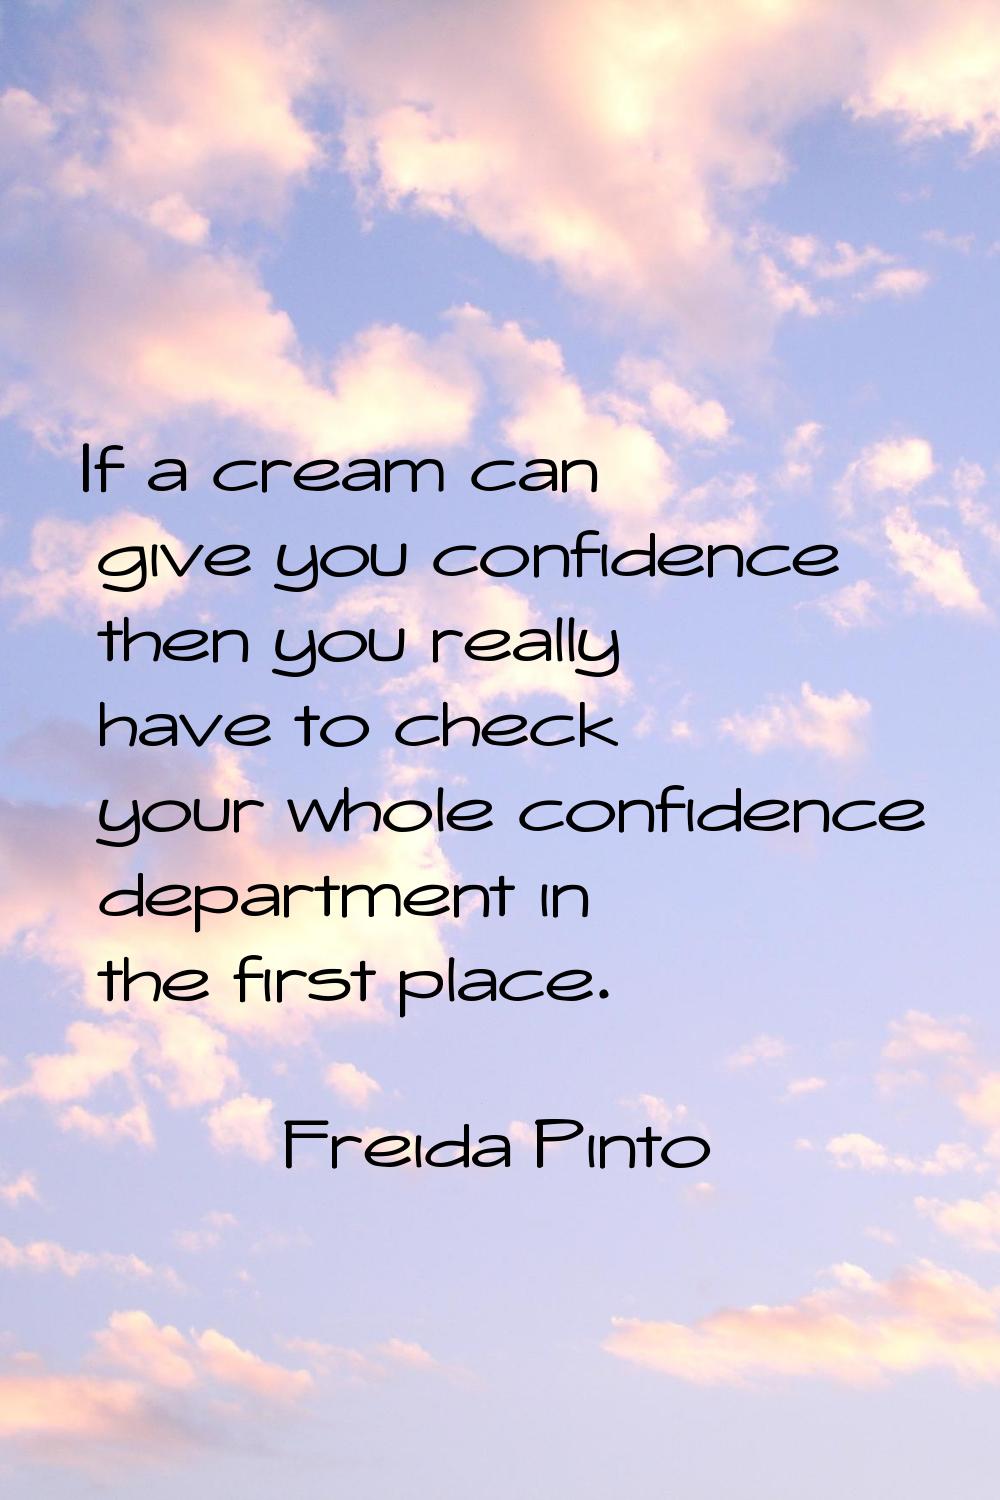 If a cream can give you confidence then you really have to check your whole confidence department i